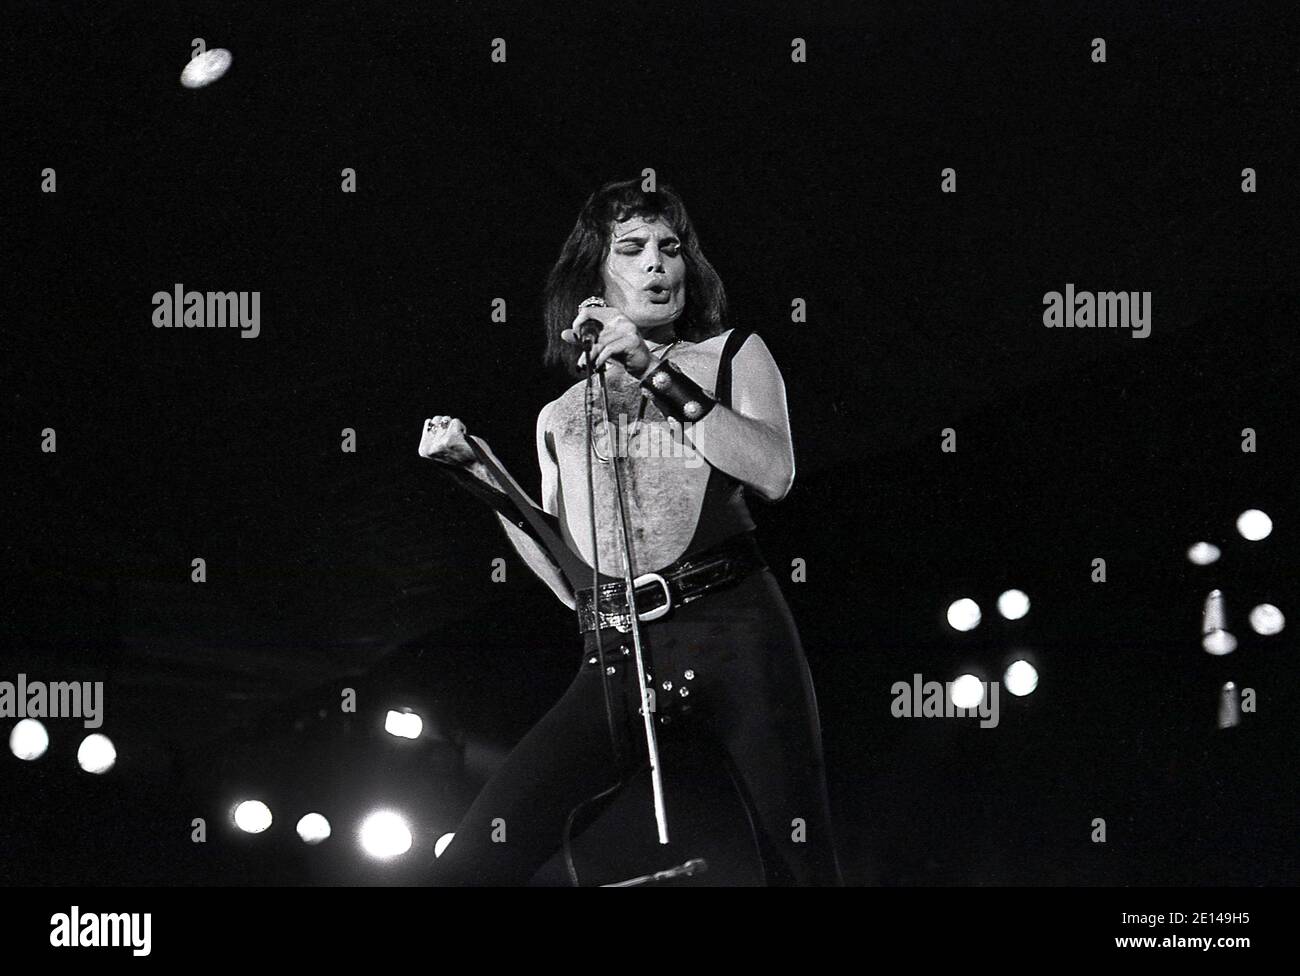 Freddie Mecury of Queen Live in Hyde Park London 18/9/1976. Free concert with 150,000 fans in the Park. Stock Photo